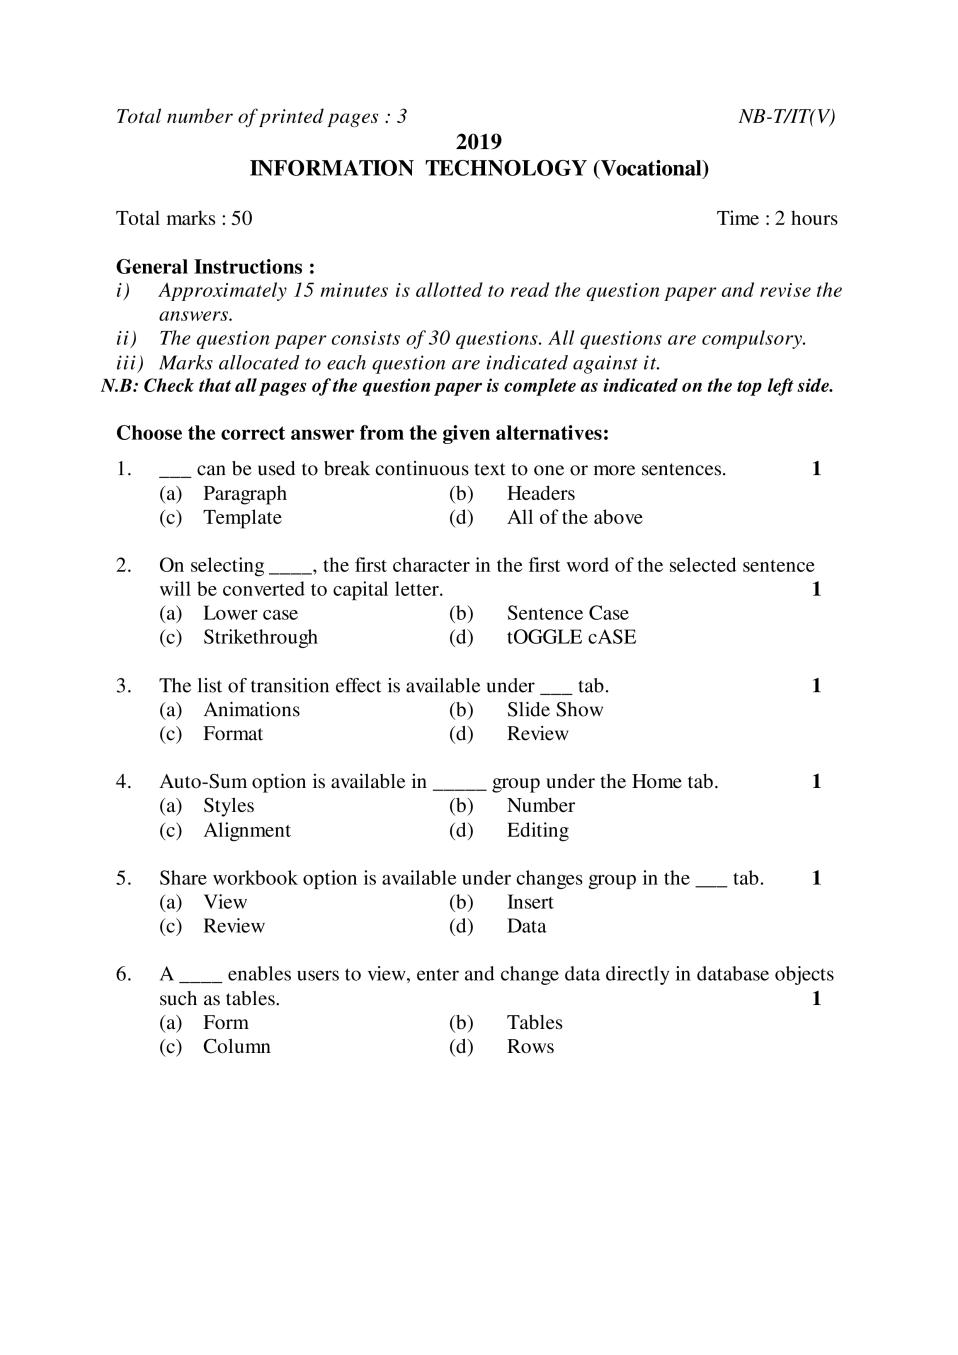 NBSE Class 10 Question Paper 2019 for Information Technology Voc - Page 1